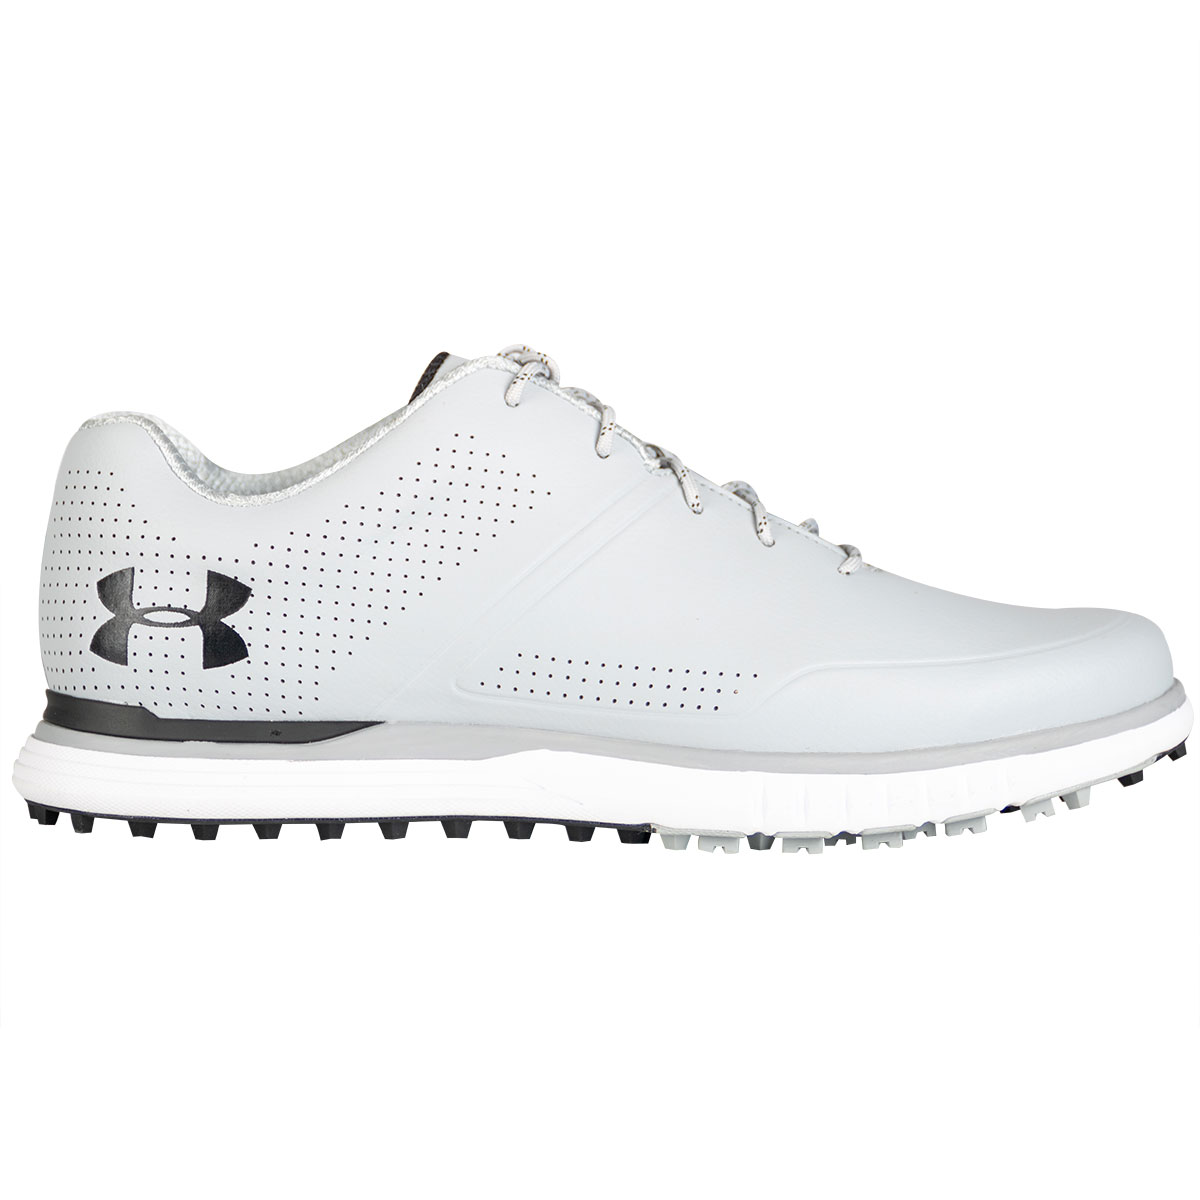 under armor golf shoes